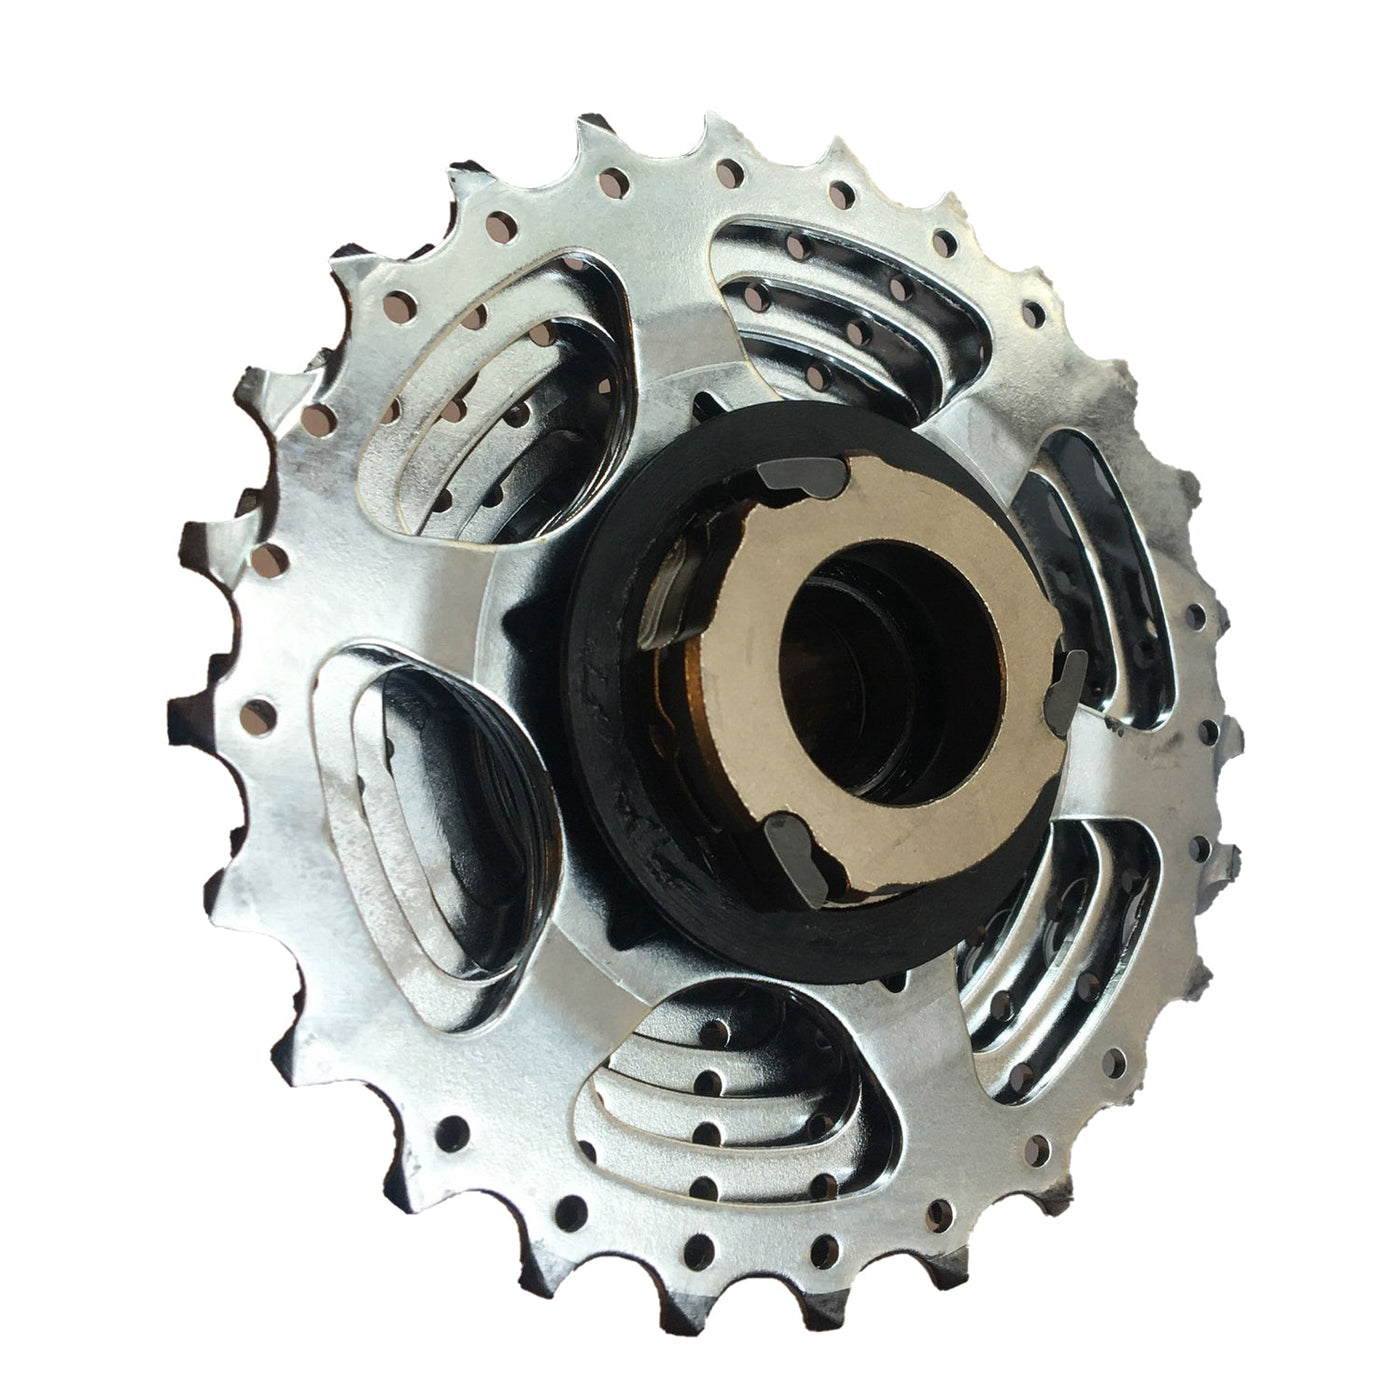 Saris H3 Freehub with 11sp cassette